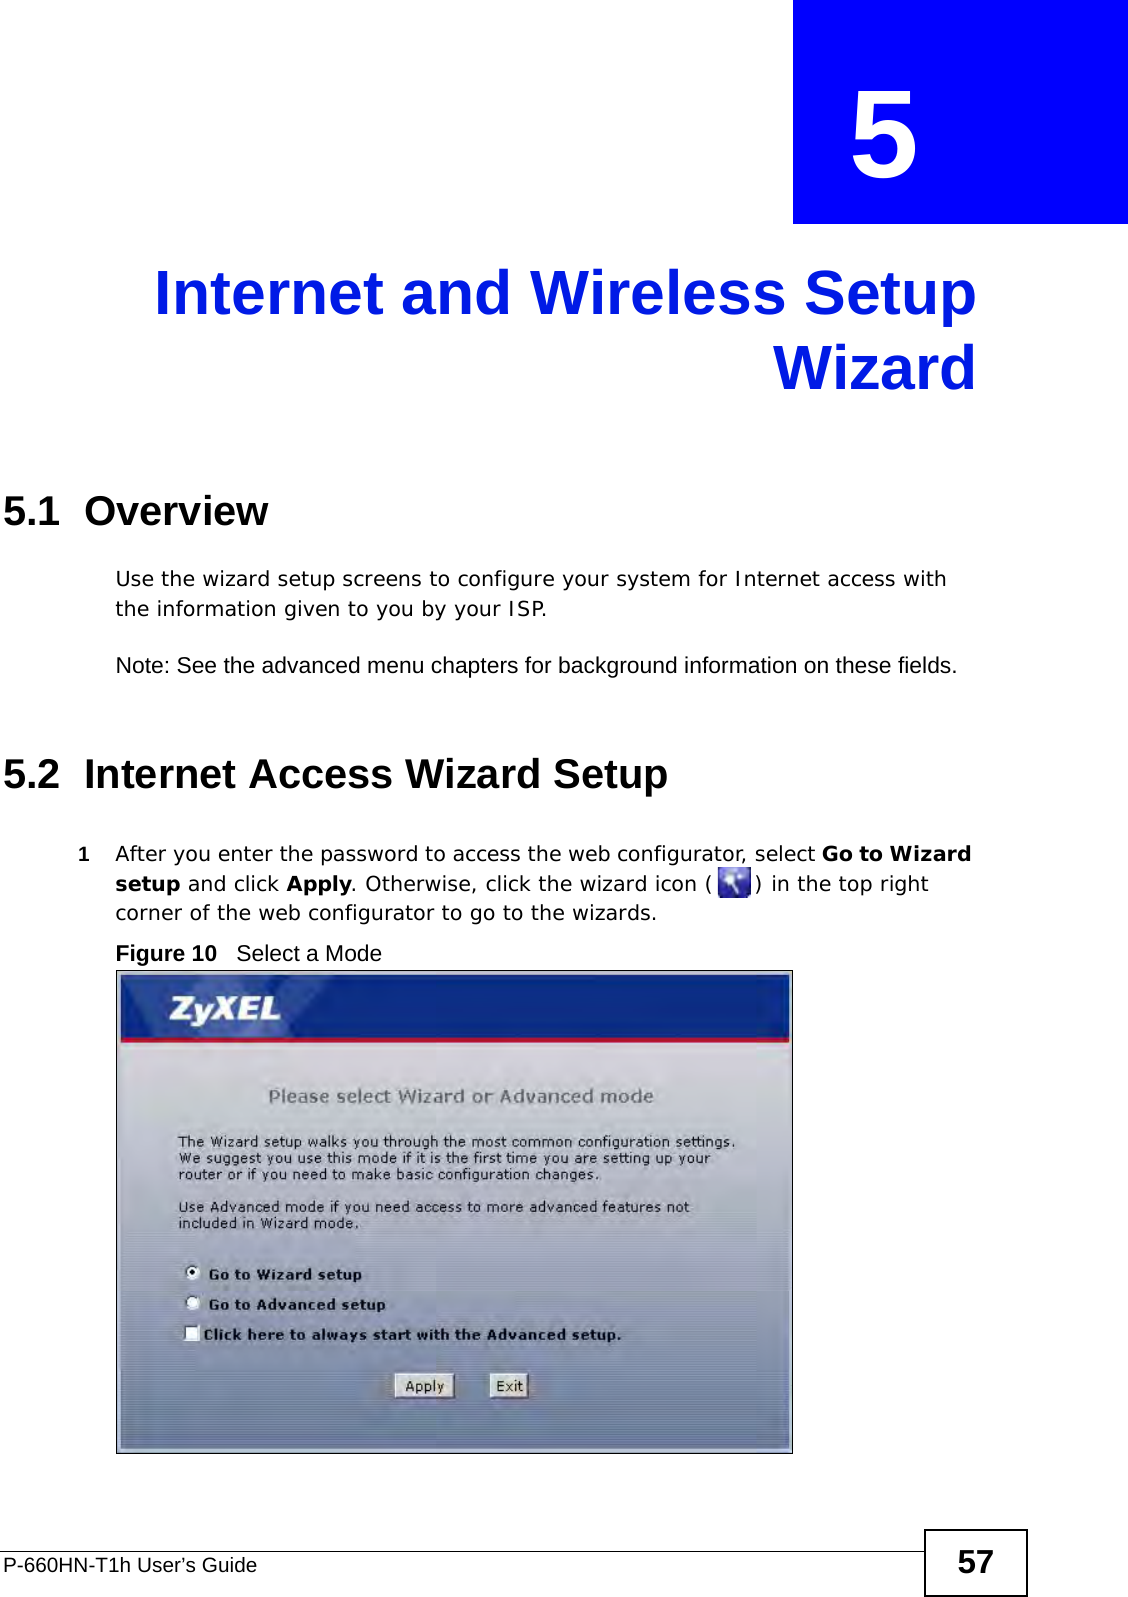 P-660HN-T1h User’s Guide 57CHAPTER  5 Internet and Wireless SetupWizard5.1  OverviewUse the wizard setup screens to configure your system for Internet access with the information given to you by your ISP. Note: See the advanced menu chapters for background information on these fields.5.2  Internet Access Wizard Setup1After you enter the password to access the web configurator, select Go to Wizard setup and click Apply. Otherwise, click the wizard icon ( ) in the top right corner of the web configurator to go to the wizards. Figure 10   Select a Mode